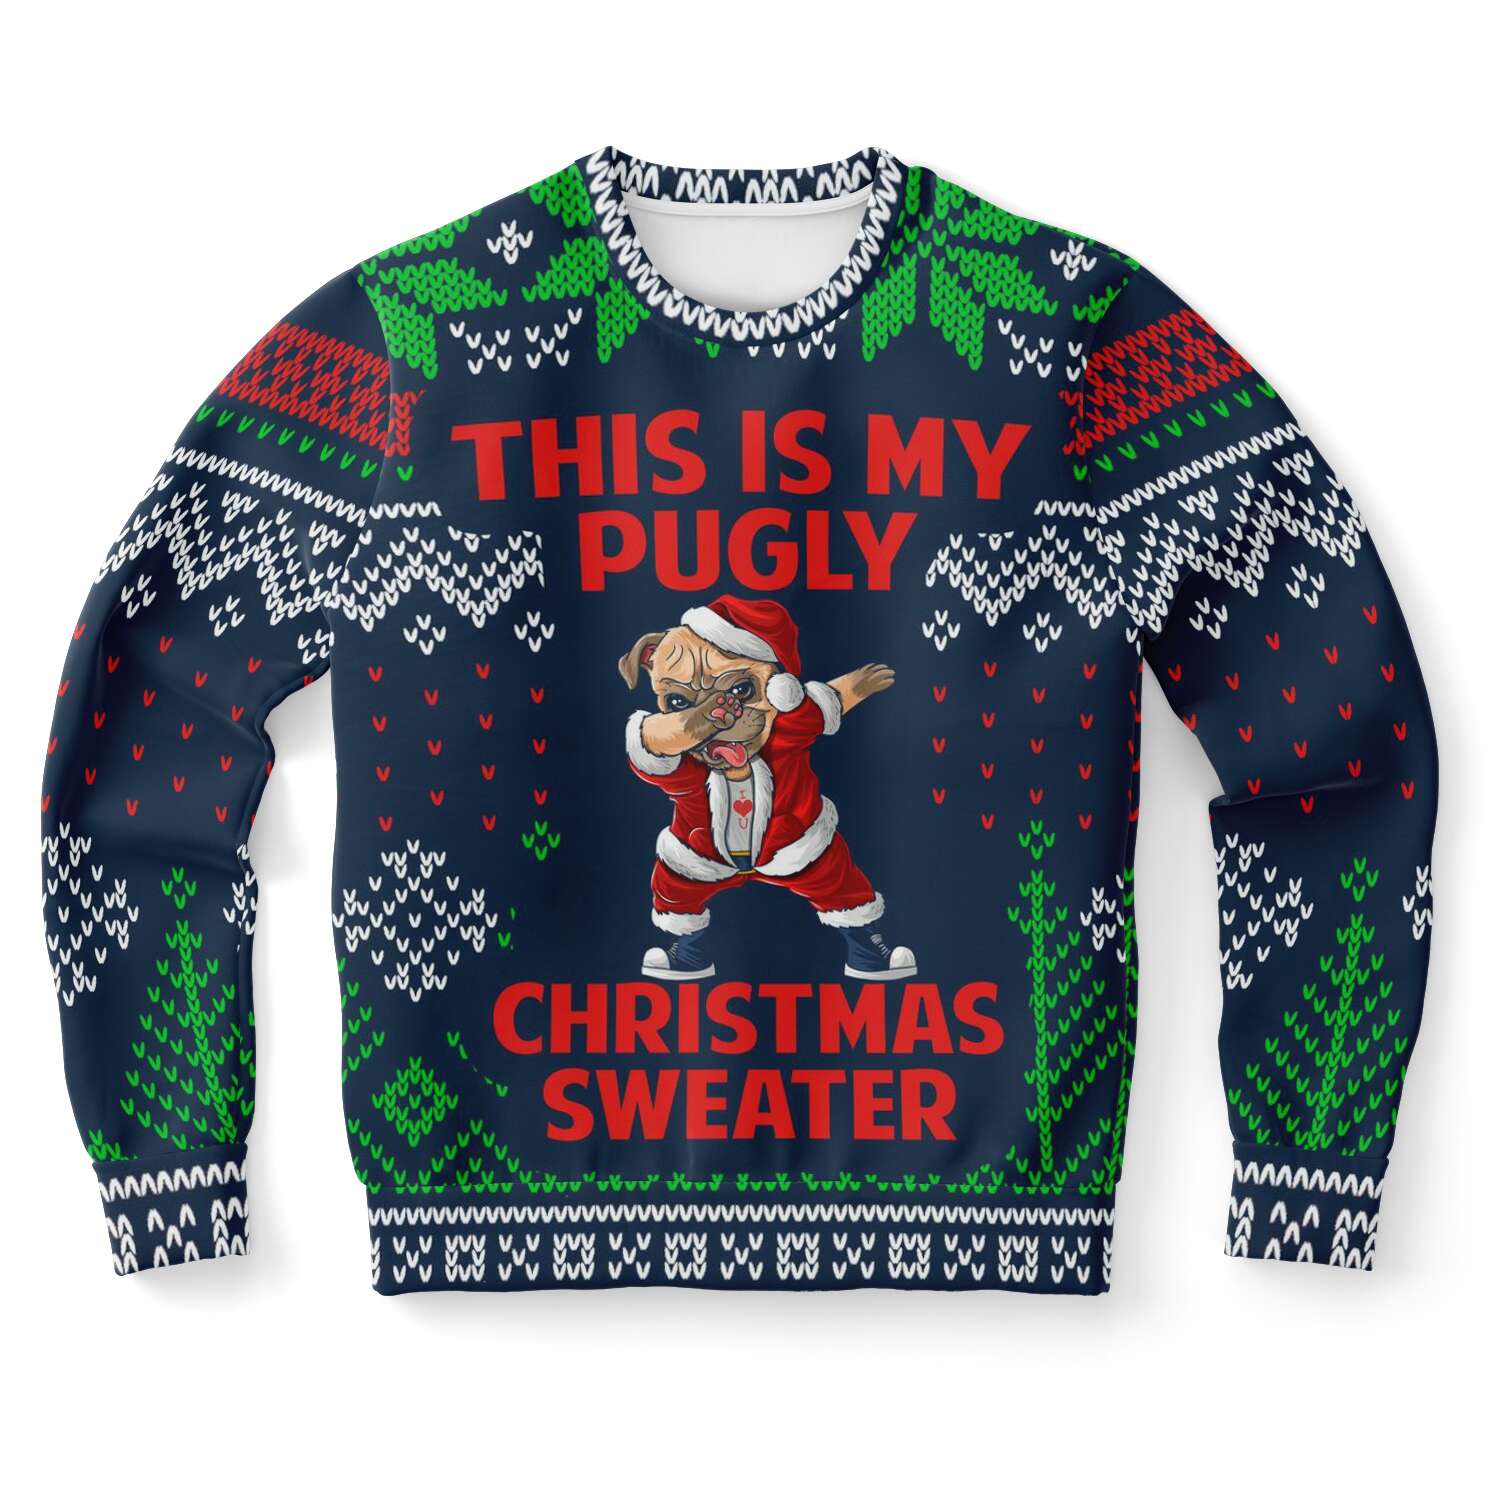 Pugly - Christmas Sweater